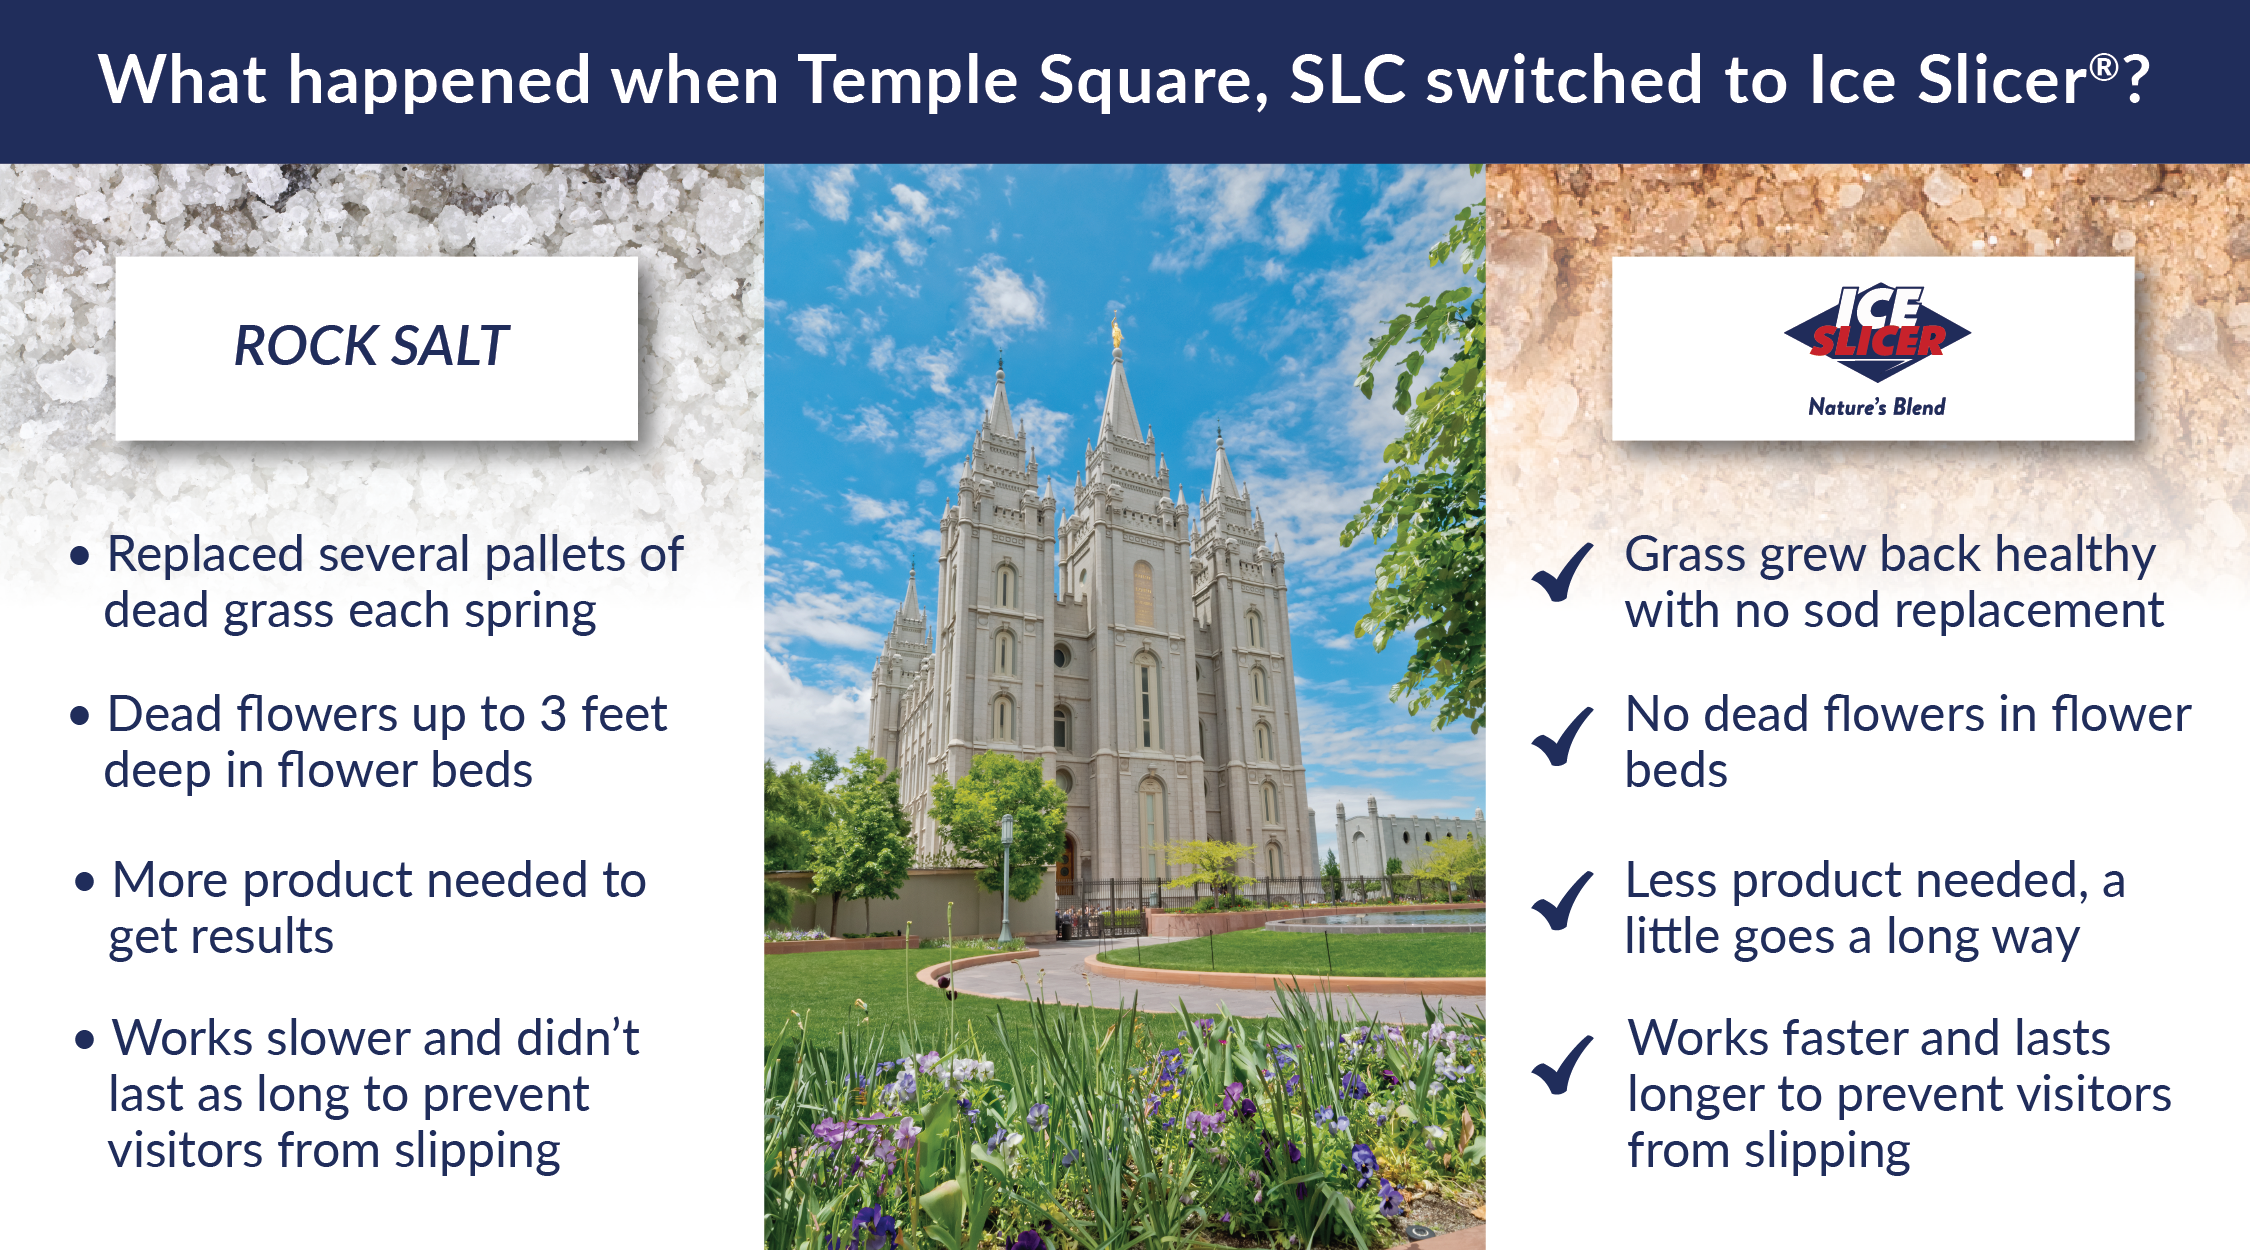 What happened when Temple Square, SLC switched to Ice Slicer?